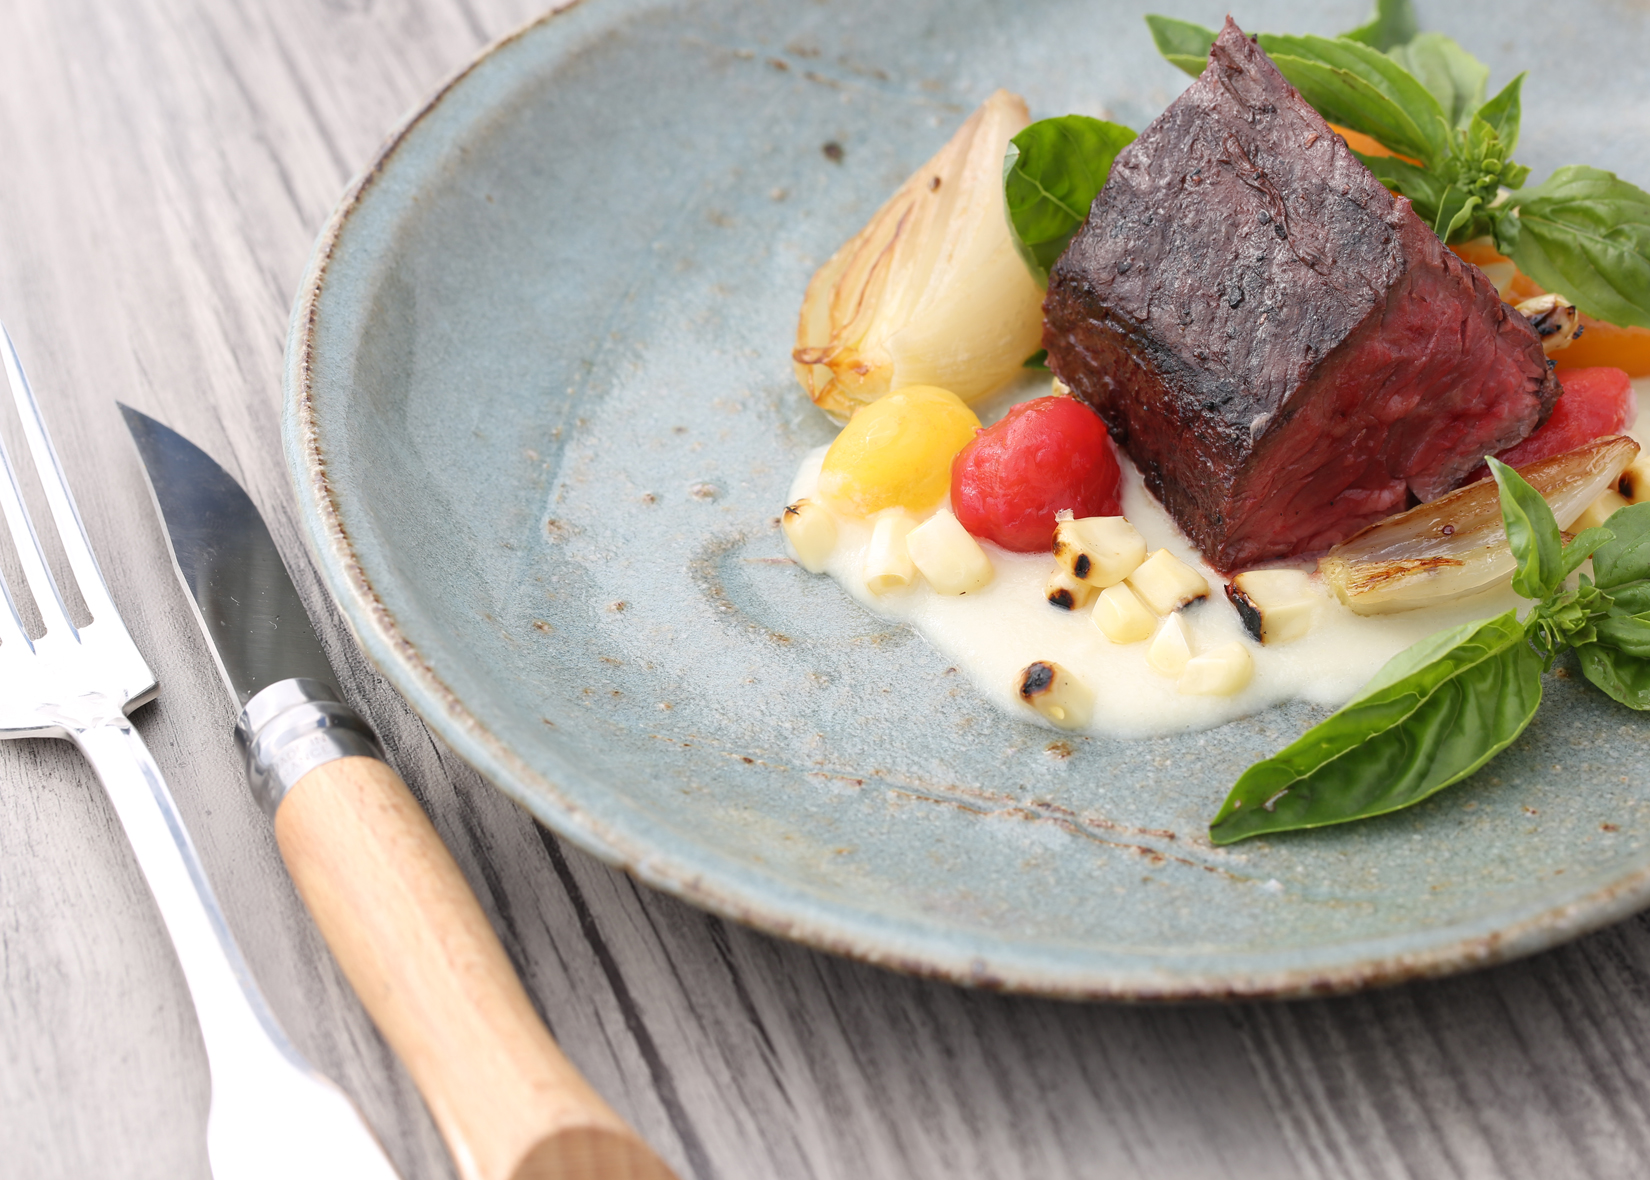 Grilled Wagyu Steak Recipe with Heirloom Tomato and Corn Pudding